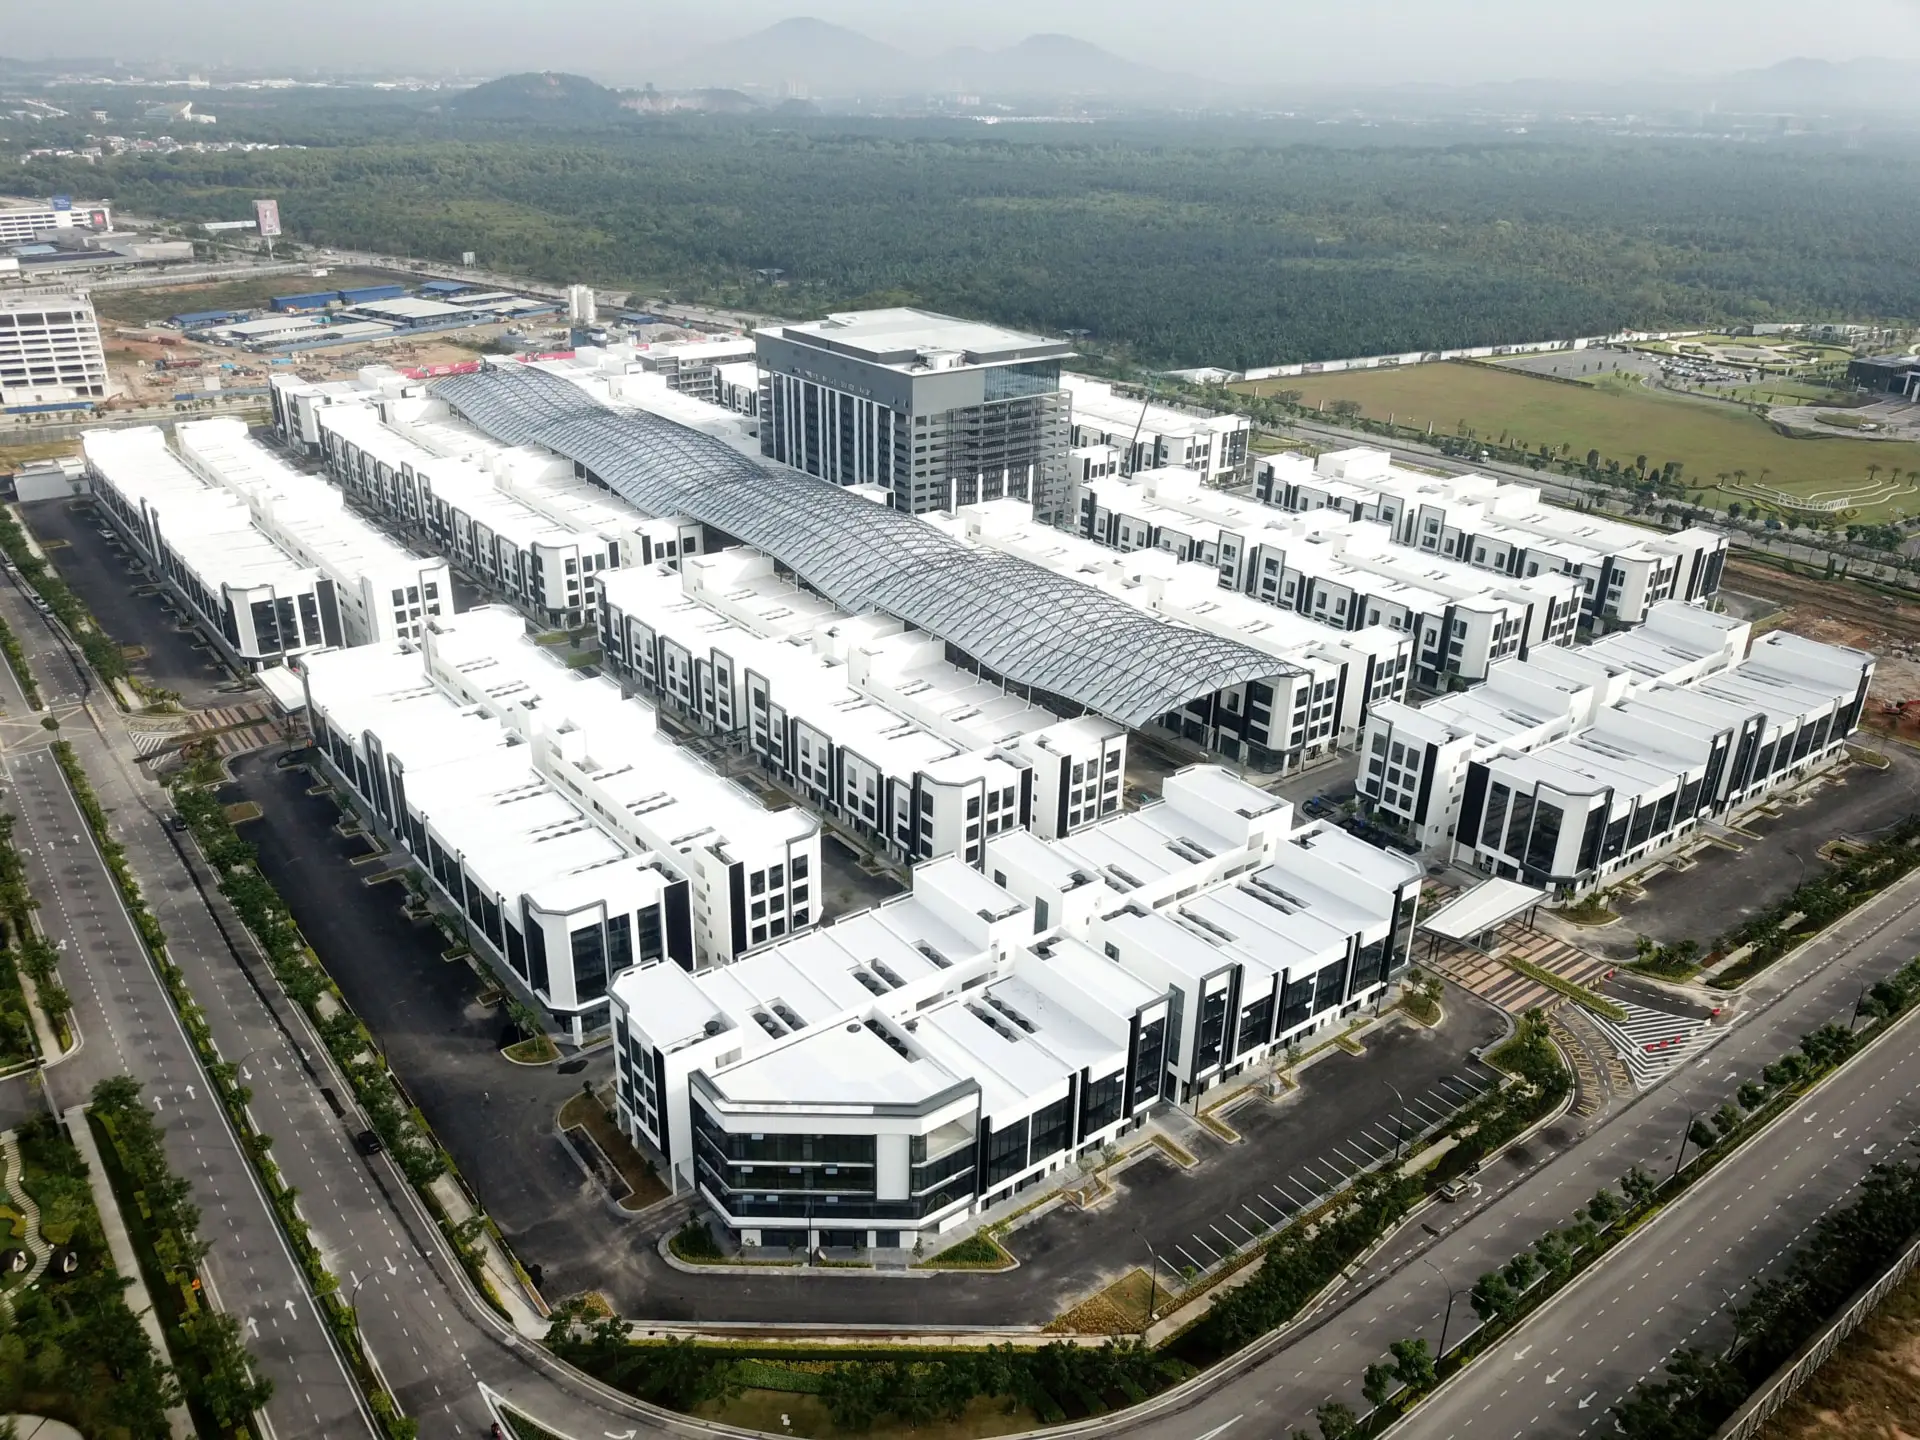  Malaysia’s biggest ETFE project, designed with climate control strategies as focal point to ensure customer comfort.